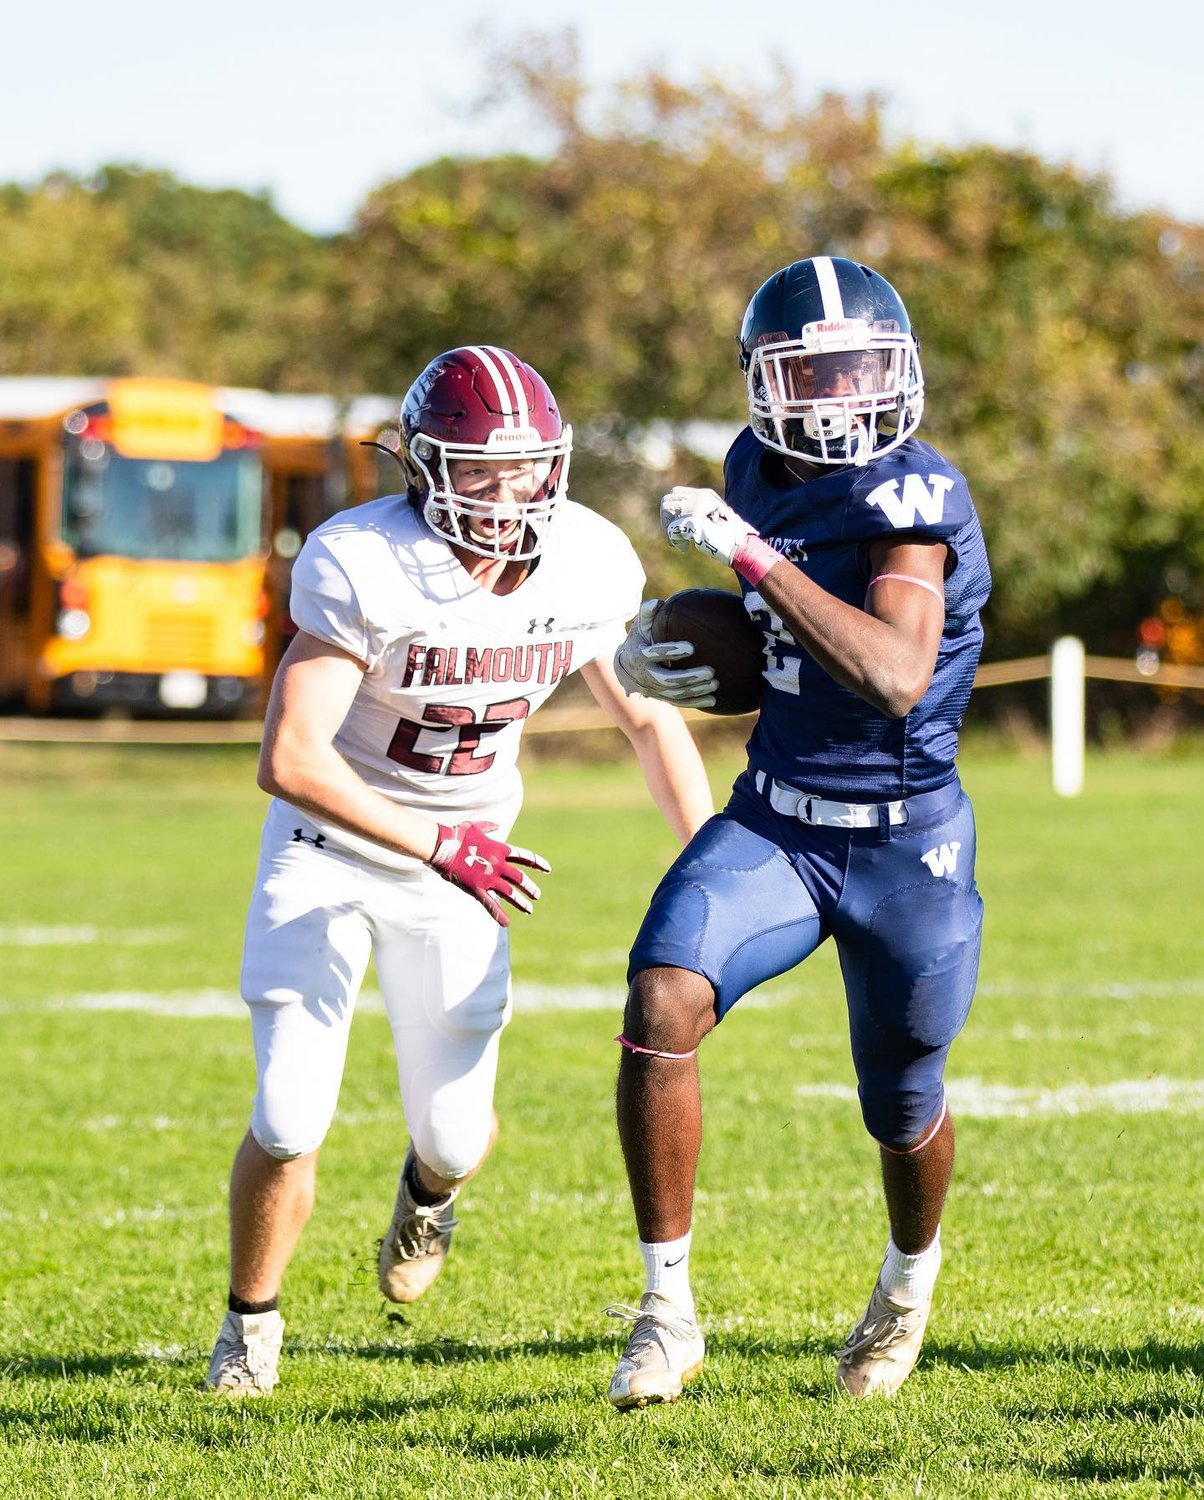 Jayquan Francis carries the ball during Saturday's game against Falmouth